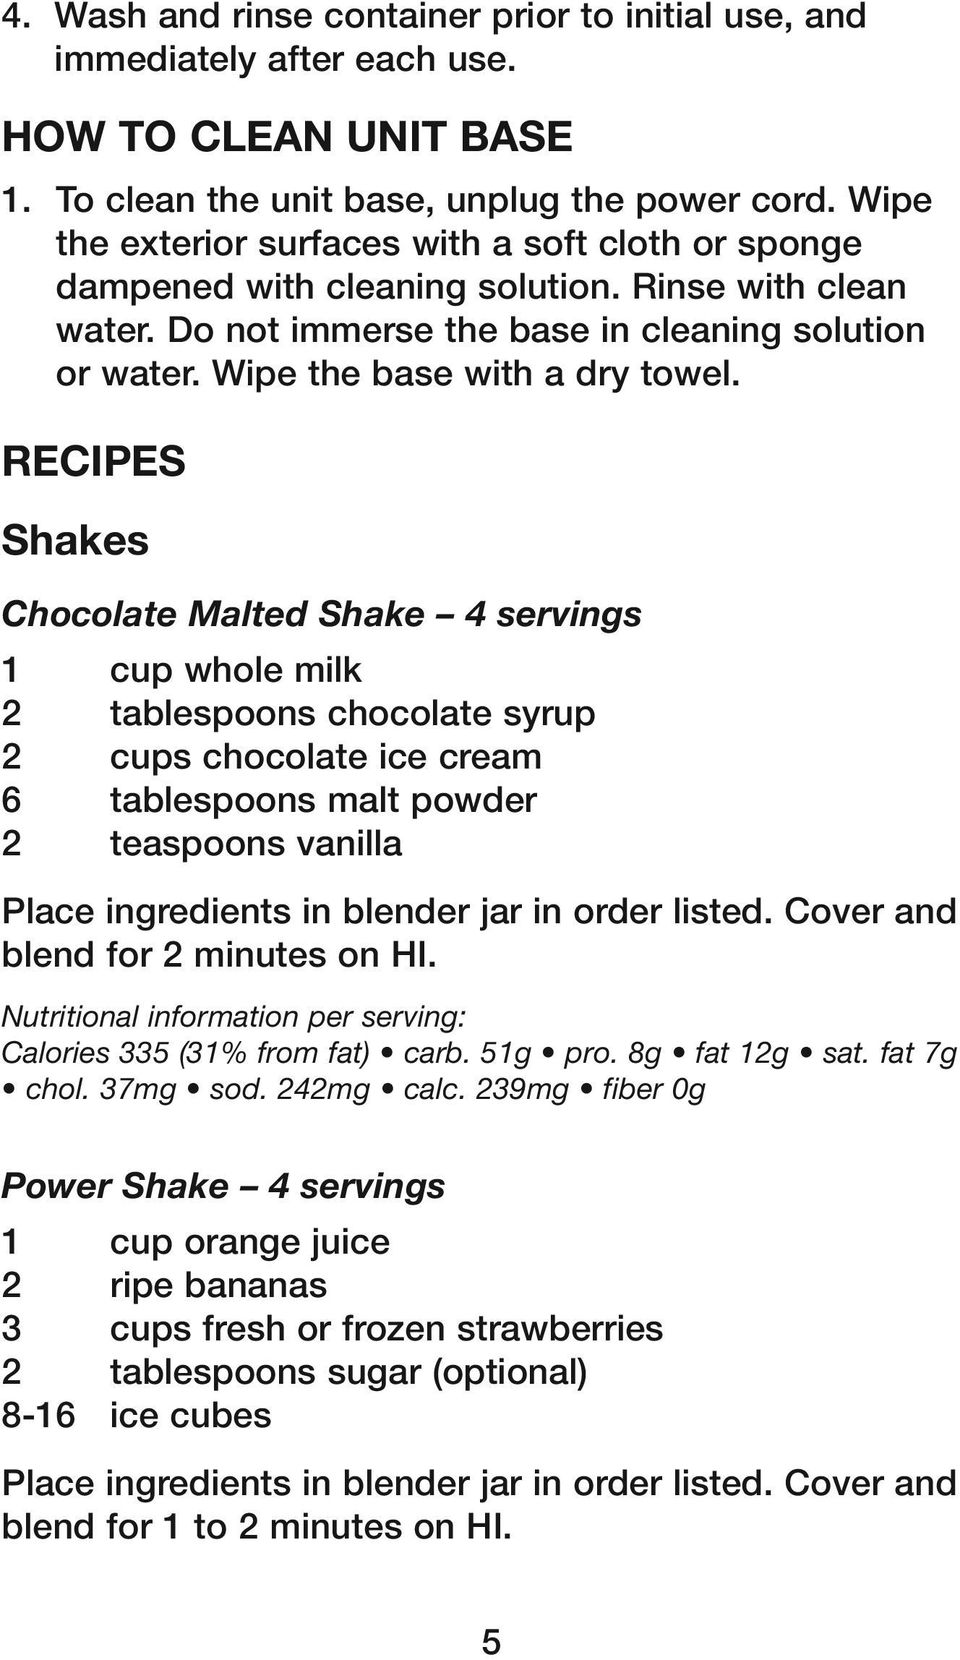 Recipes Shakes Chocolate Malted Shake 4 servings 1 cup whole milk 2 tablespoons chocolate syrup 2 cups chocolate ice cream 6 tablespoons malt powder 2 teaspoons vanilla Place ingredients in blender